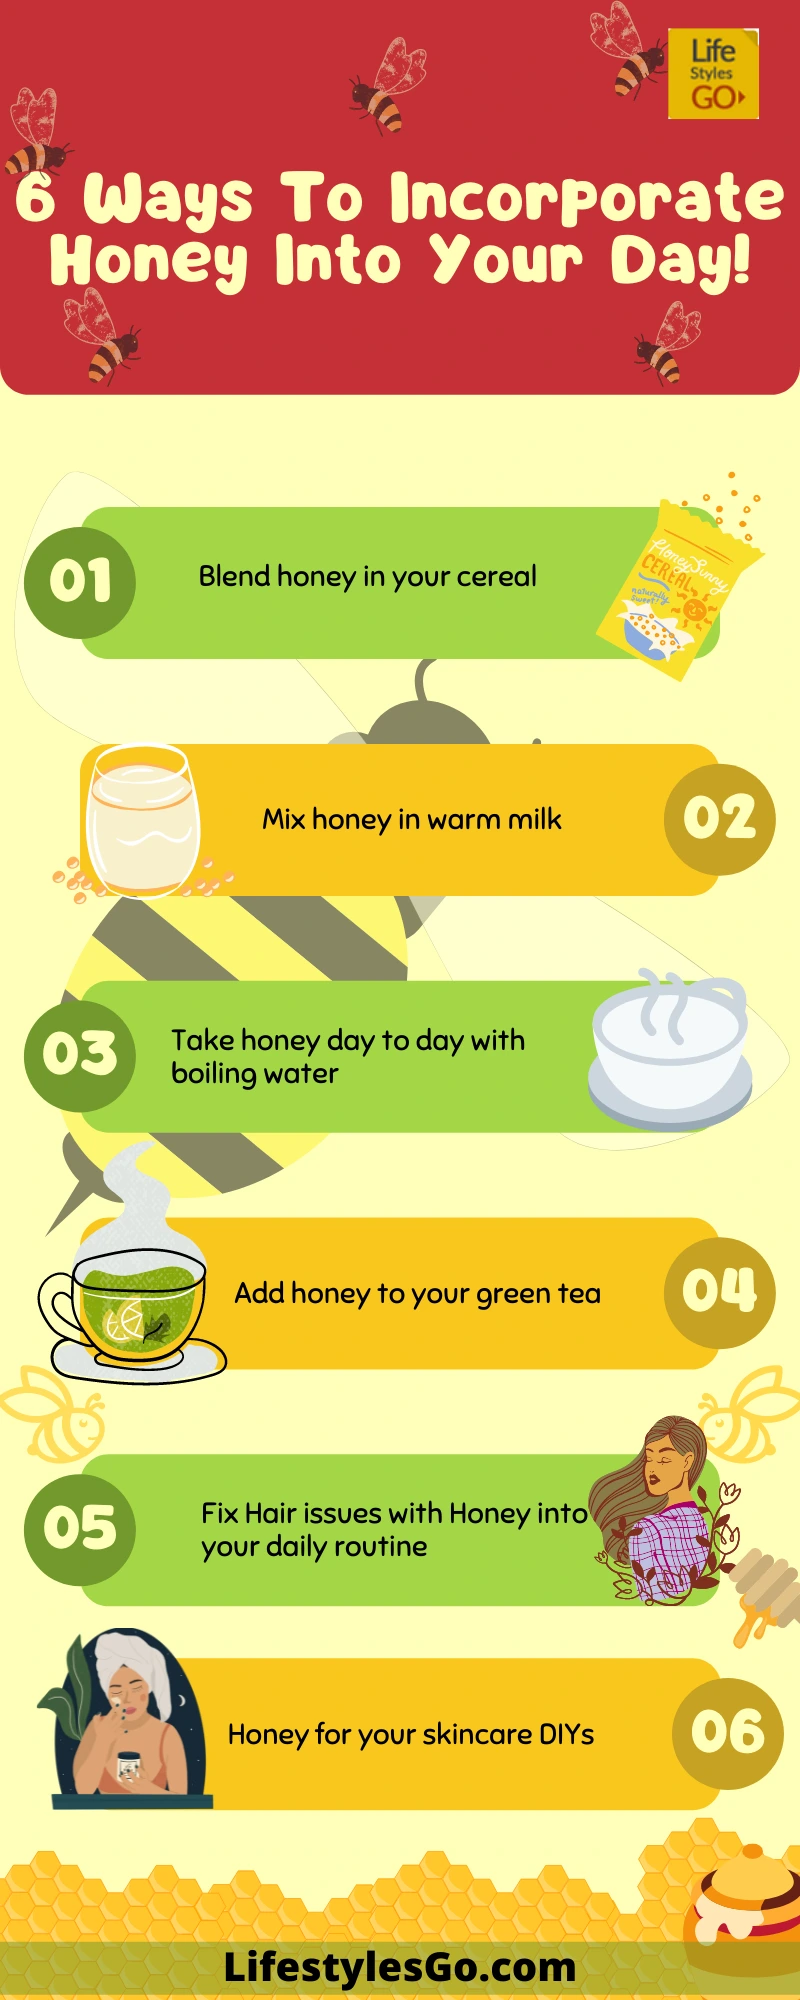 Incorporate Honey Into Your Daily Routine Infographic